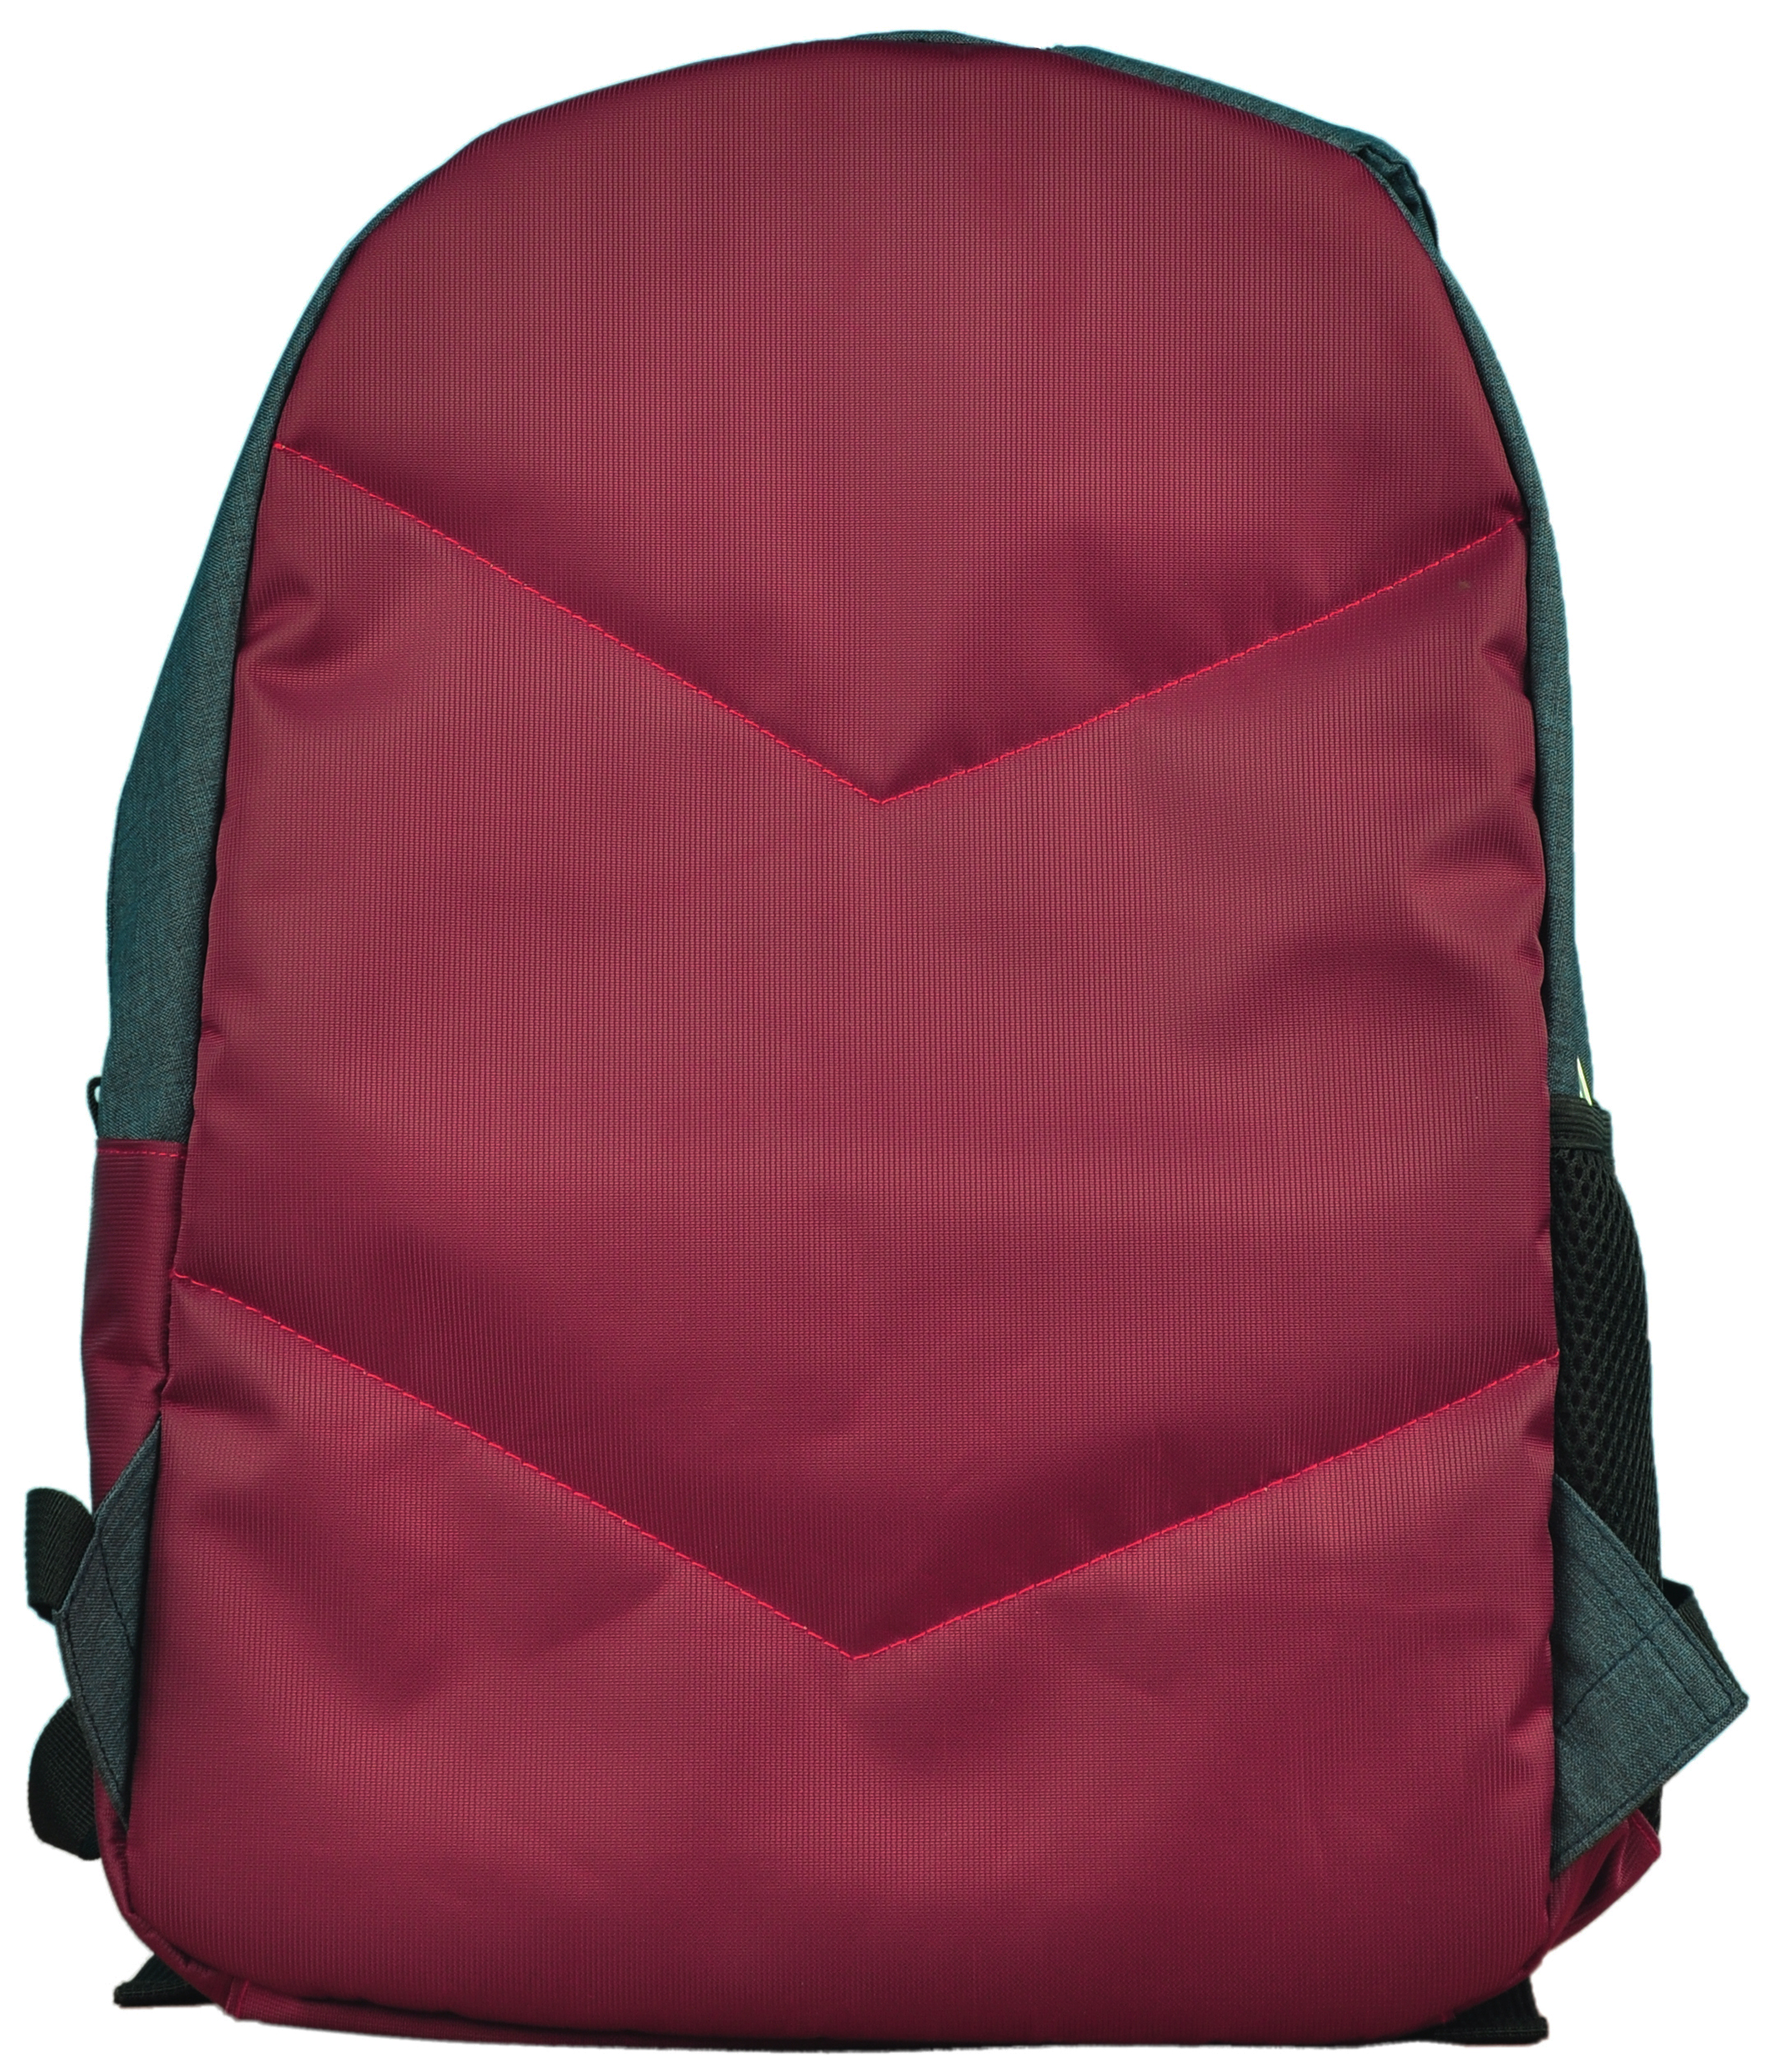 Protege 18" Heather Colorblock Adult Backpack, Navy/Maroon - Unisex - image 5 of 5